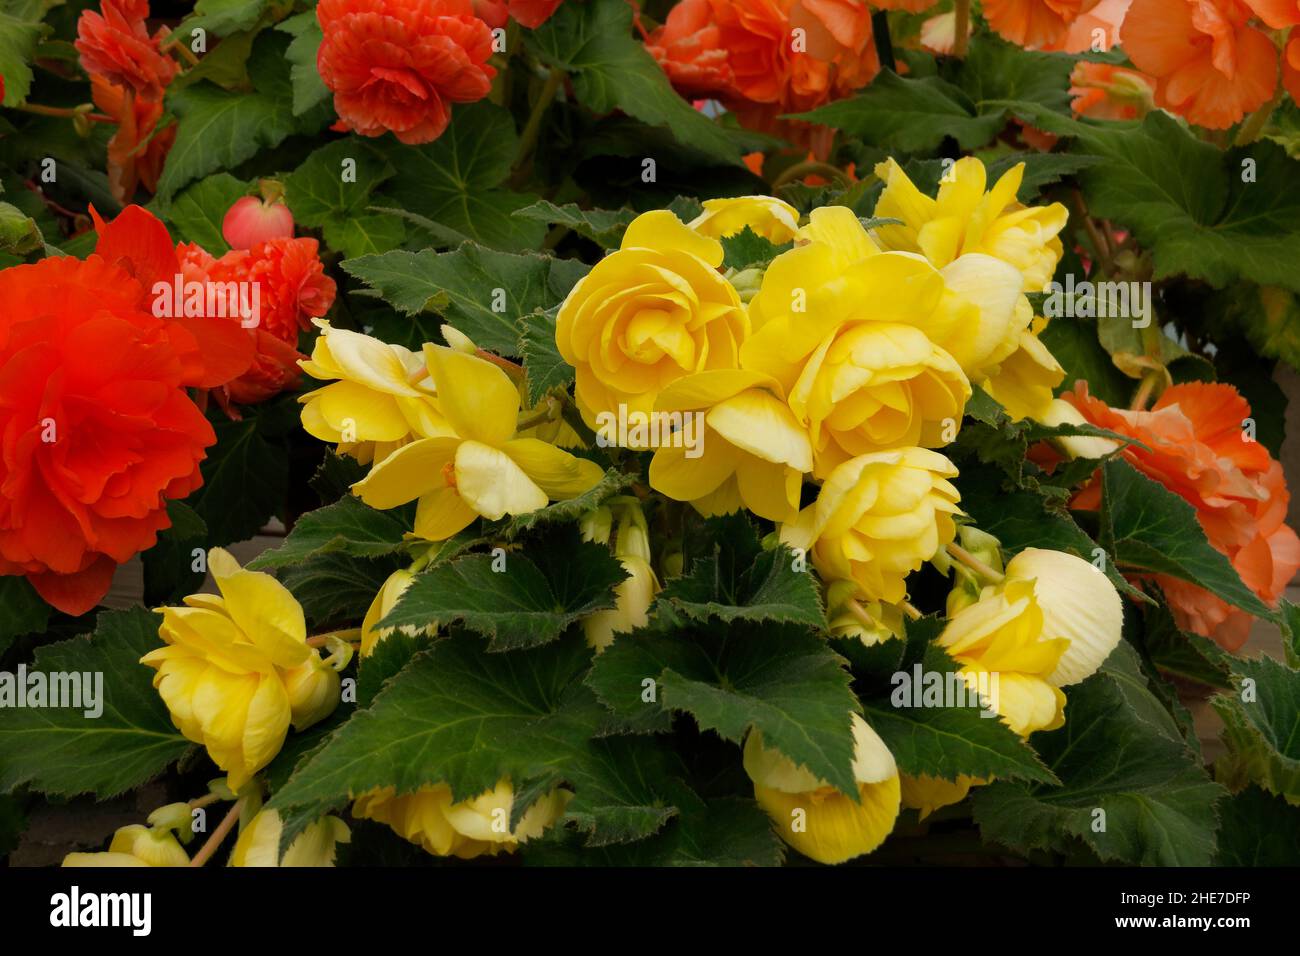 Yellow Tuber Begonias, Roseform, in Garden, Green Leaves with Serrated Edges, with Orange Double Begonia Stock Photo